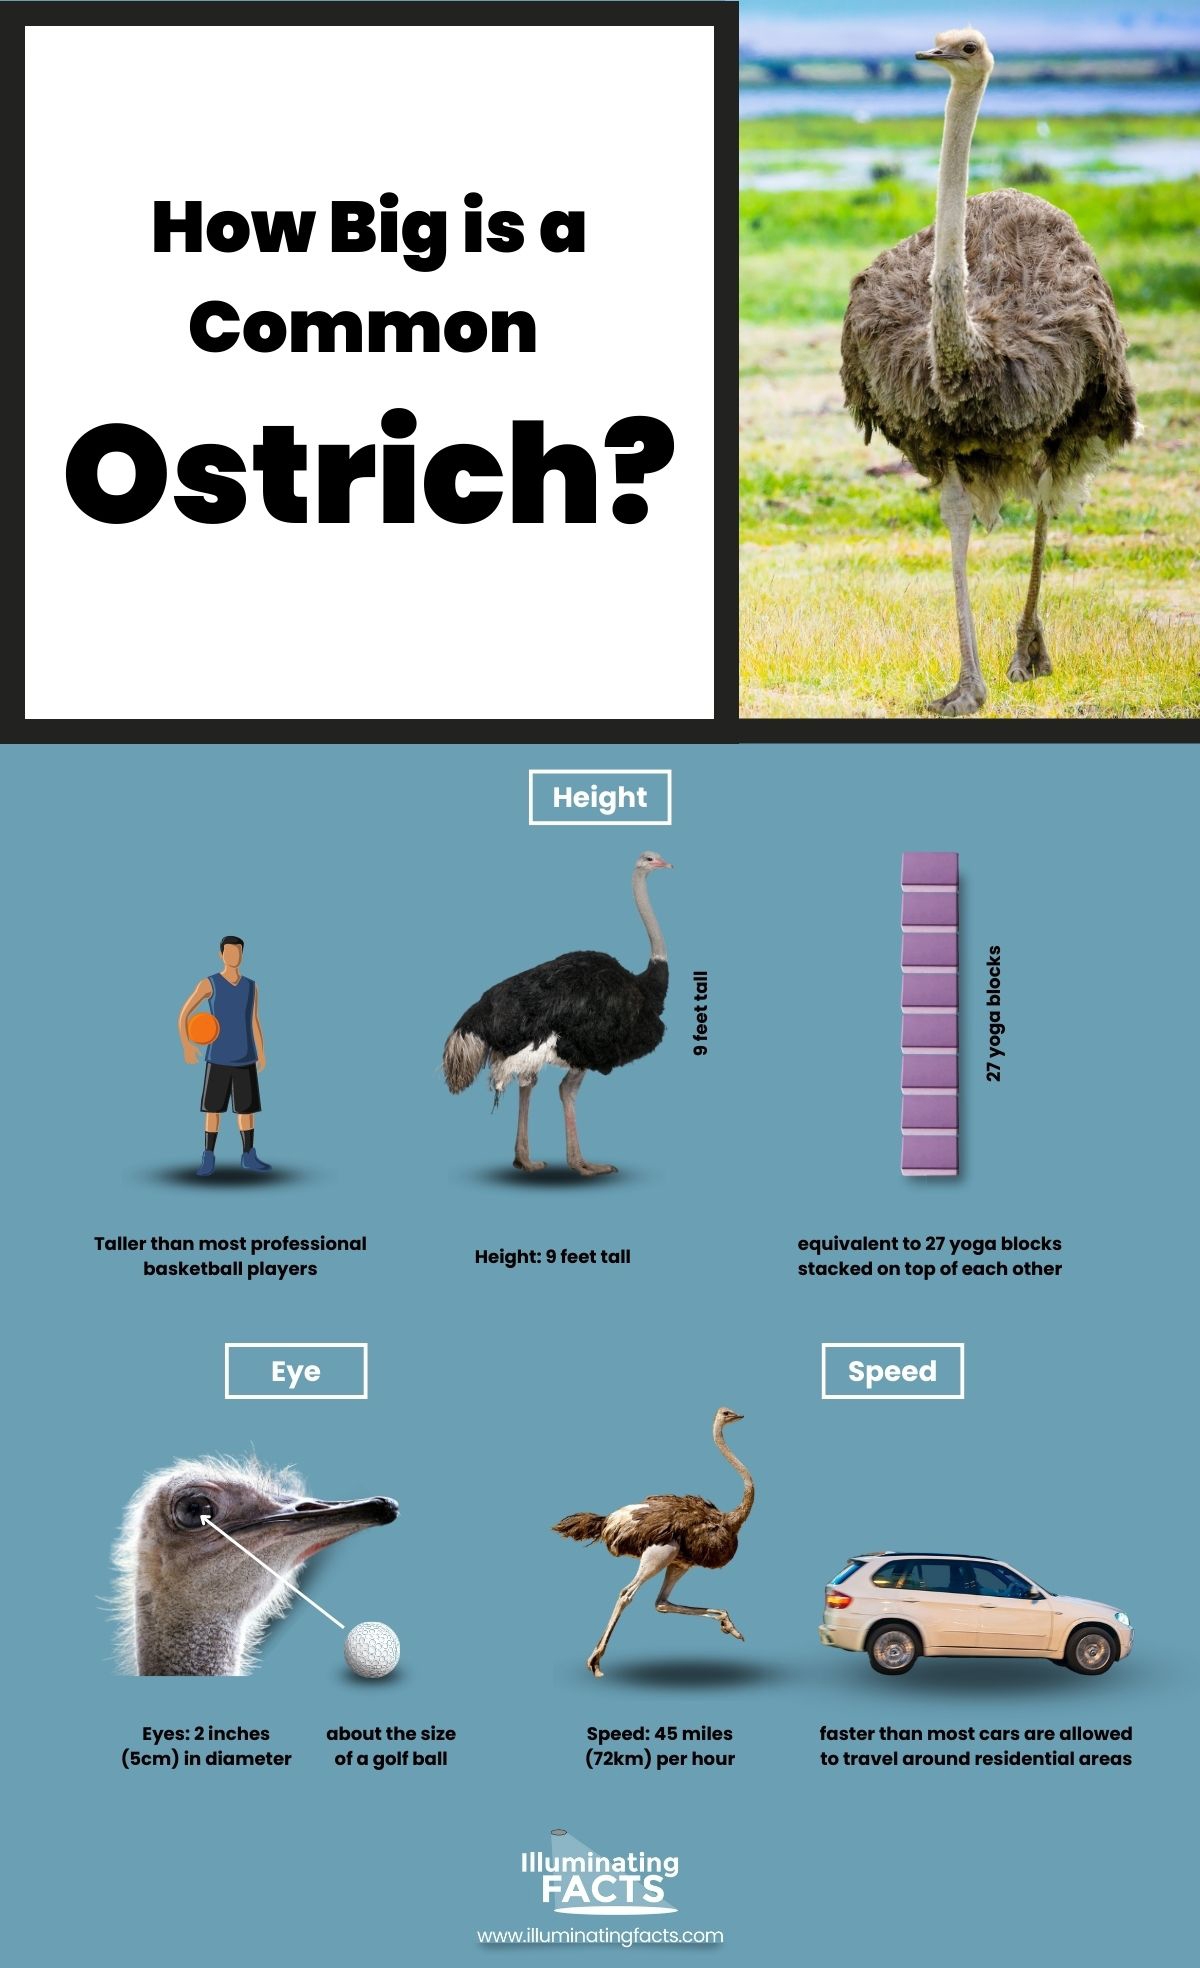 How Big is a Common Ostrich?